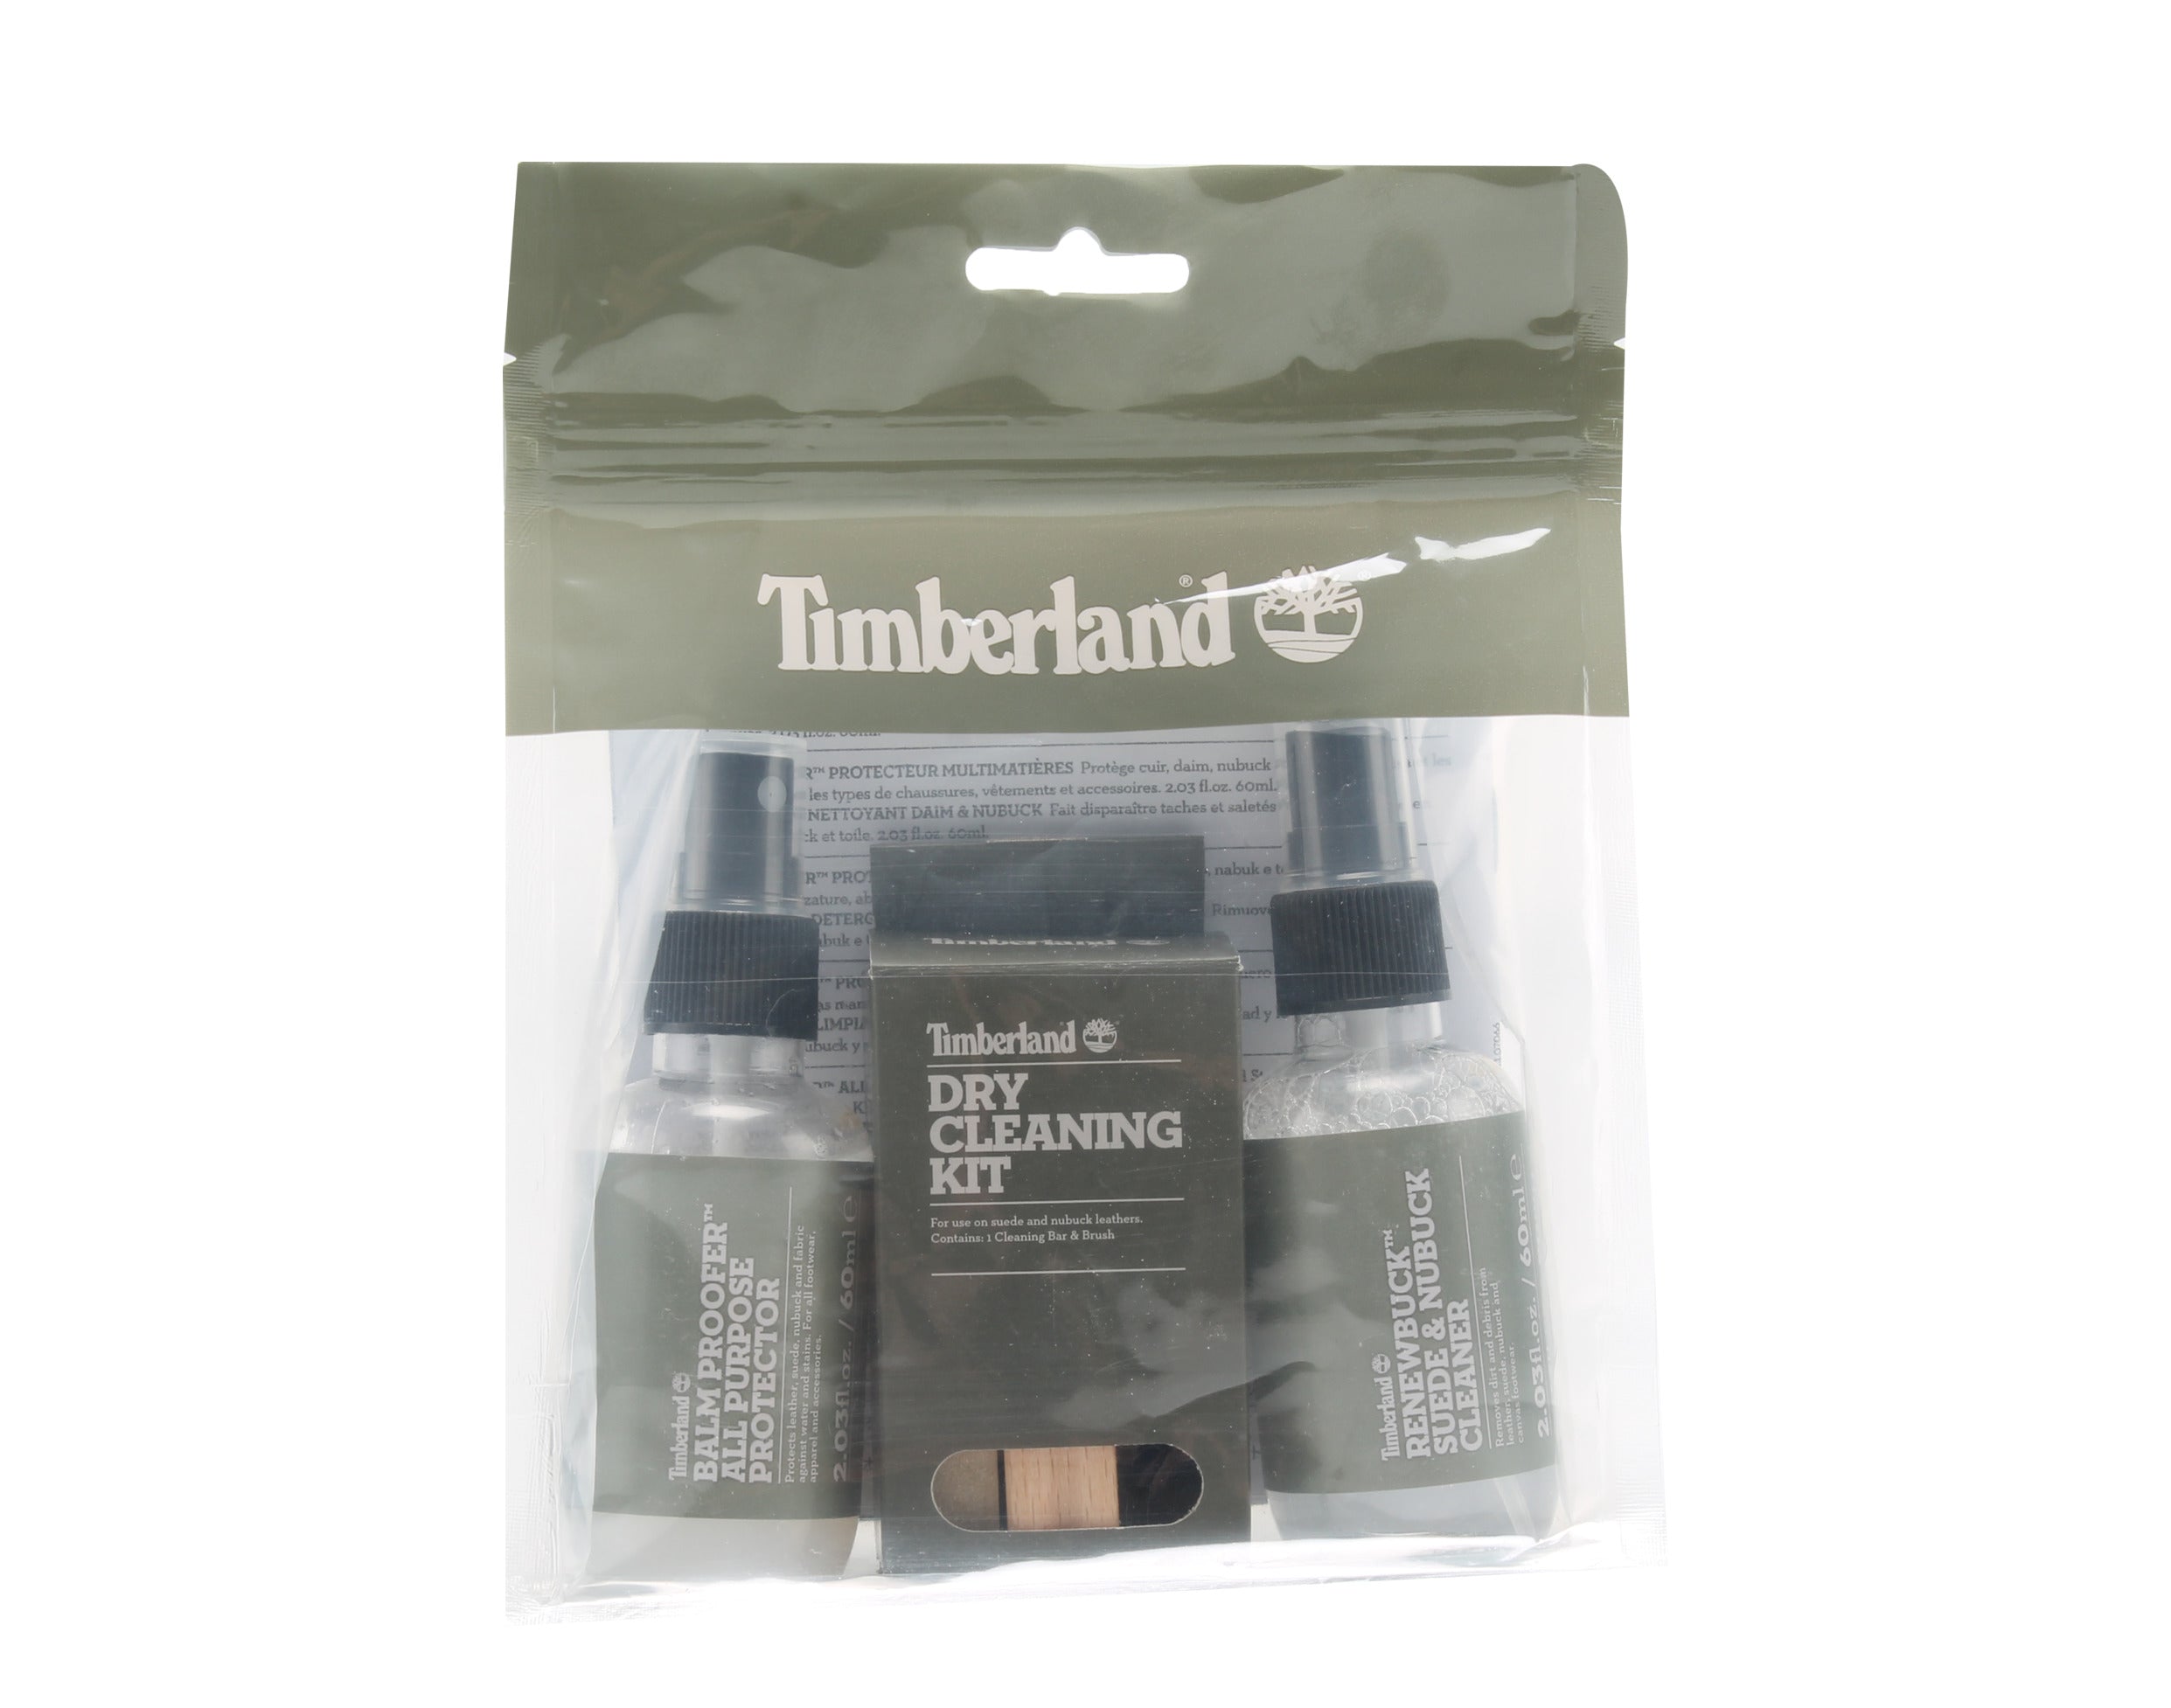 Timberland Footwear Dry Cleaning Kit